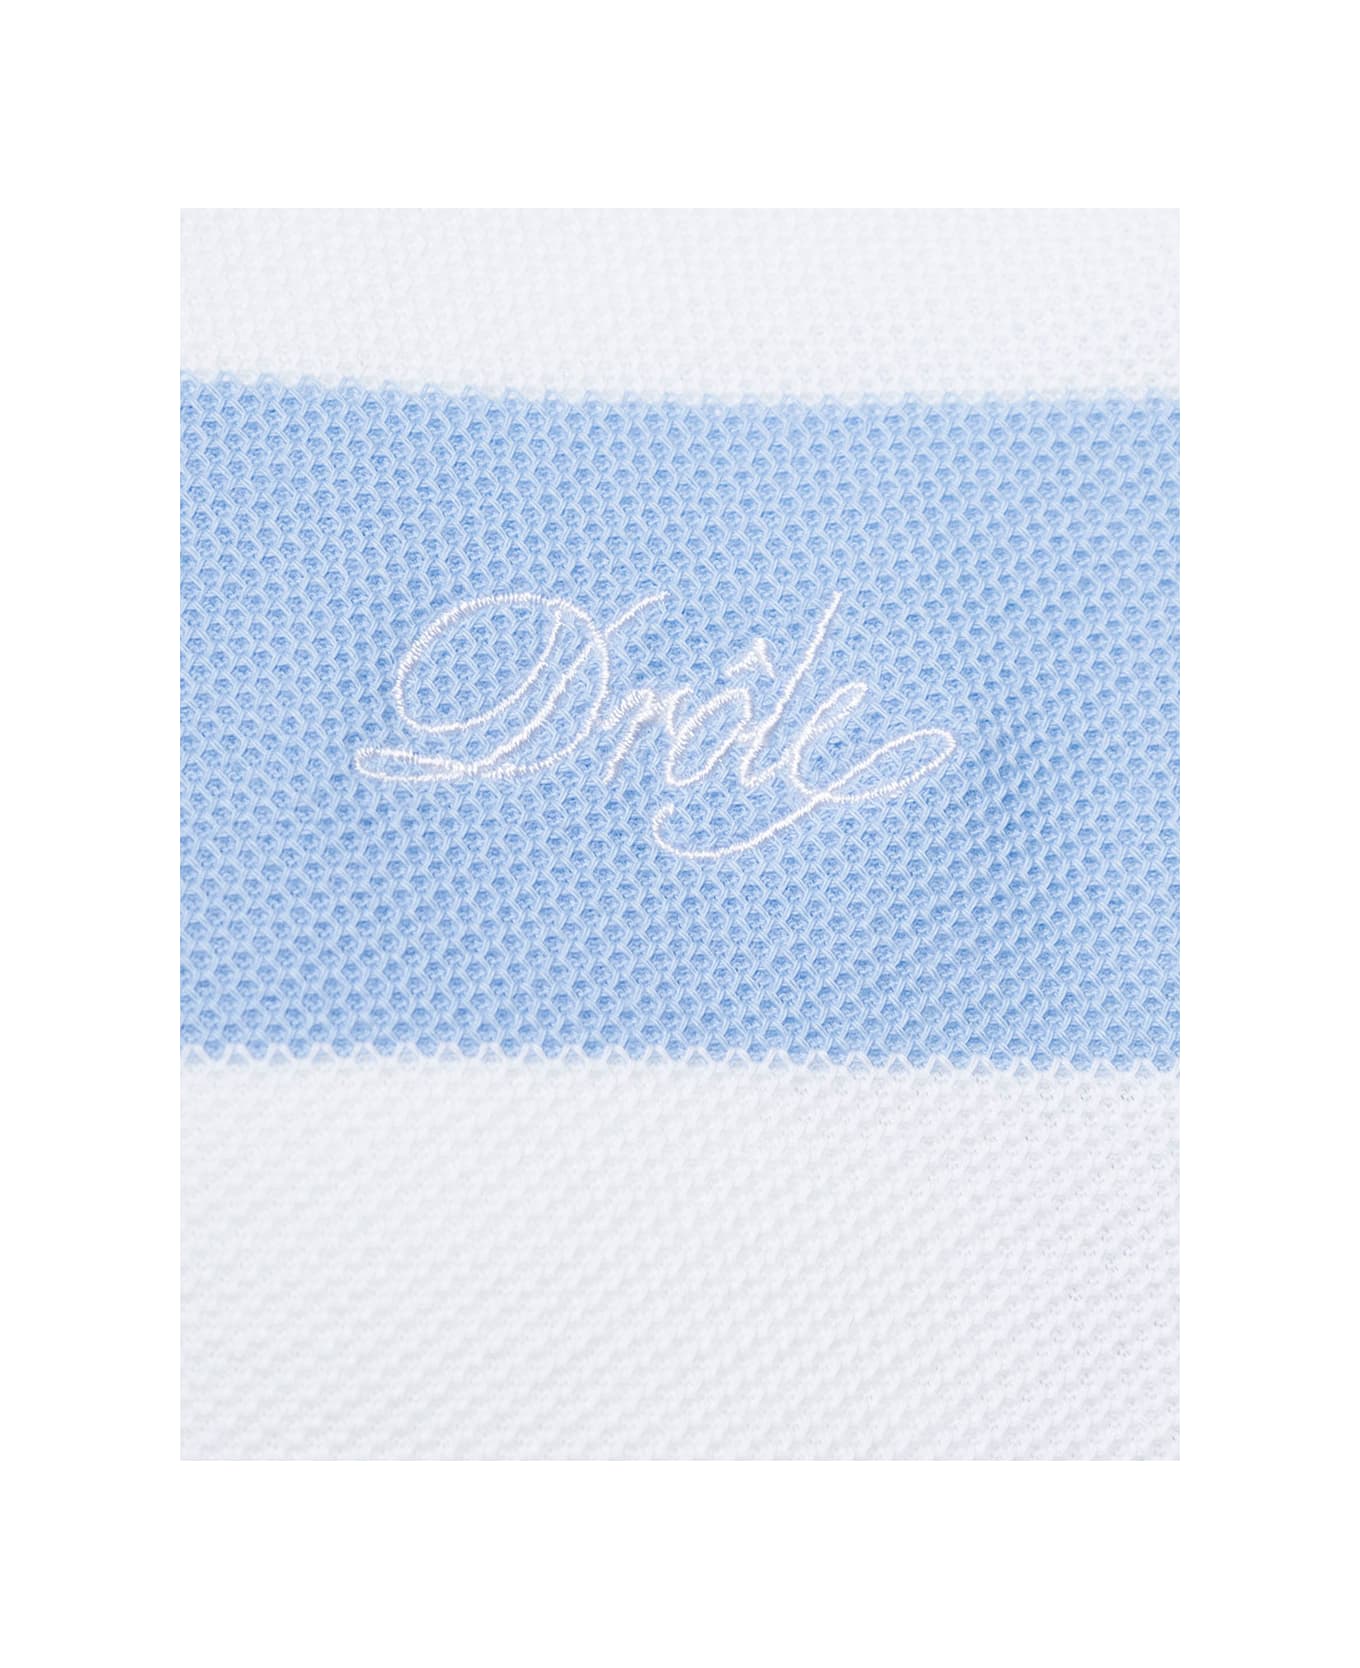 Drôle de Monsieur Light Blue And White Striped Polo Shirt With Logo Embroidery In Cotton Man - Light blue